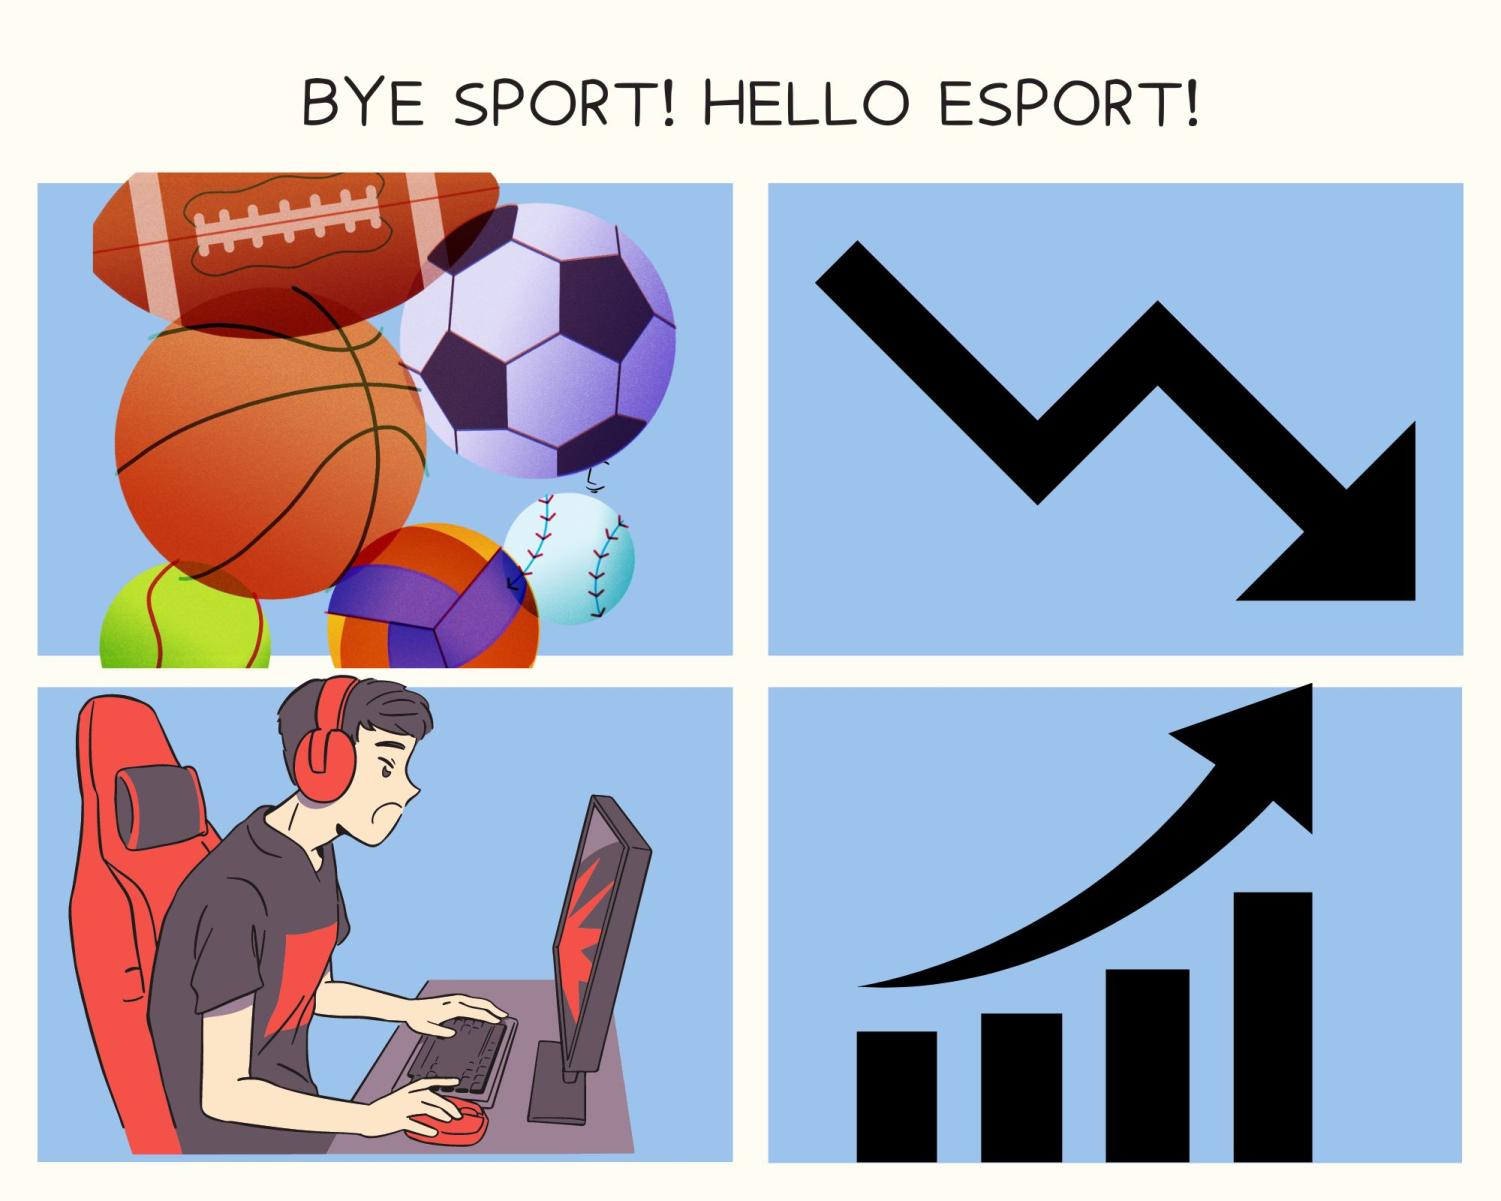 The Esports industry continues to rise by stimulating employment and economic growth. The sports industry continues to decline due to numerous negative reasons like questionable coaching and extreme pressures placed on athletes. Popular sporting events, such as the Super Bowl, consistently diminish in viewership, with 96.4 million last year compared to the year before with 100.45 million viewers. On the contrary, the 2021 League of Legends World Championship in Iceland garnered 76.3 million viewers.